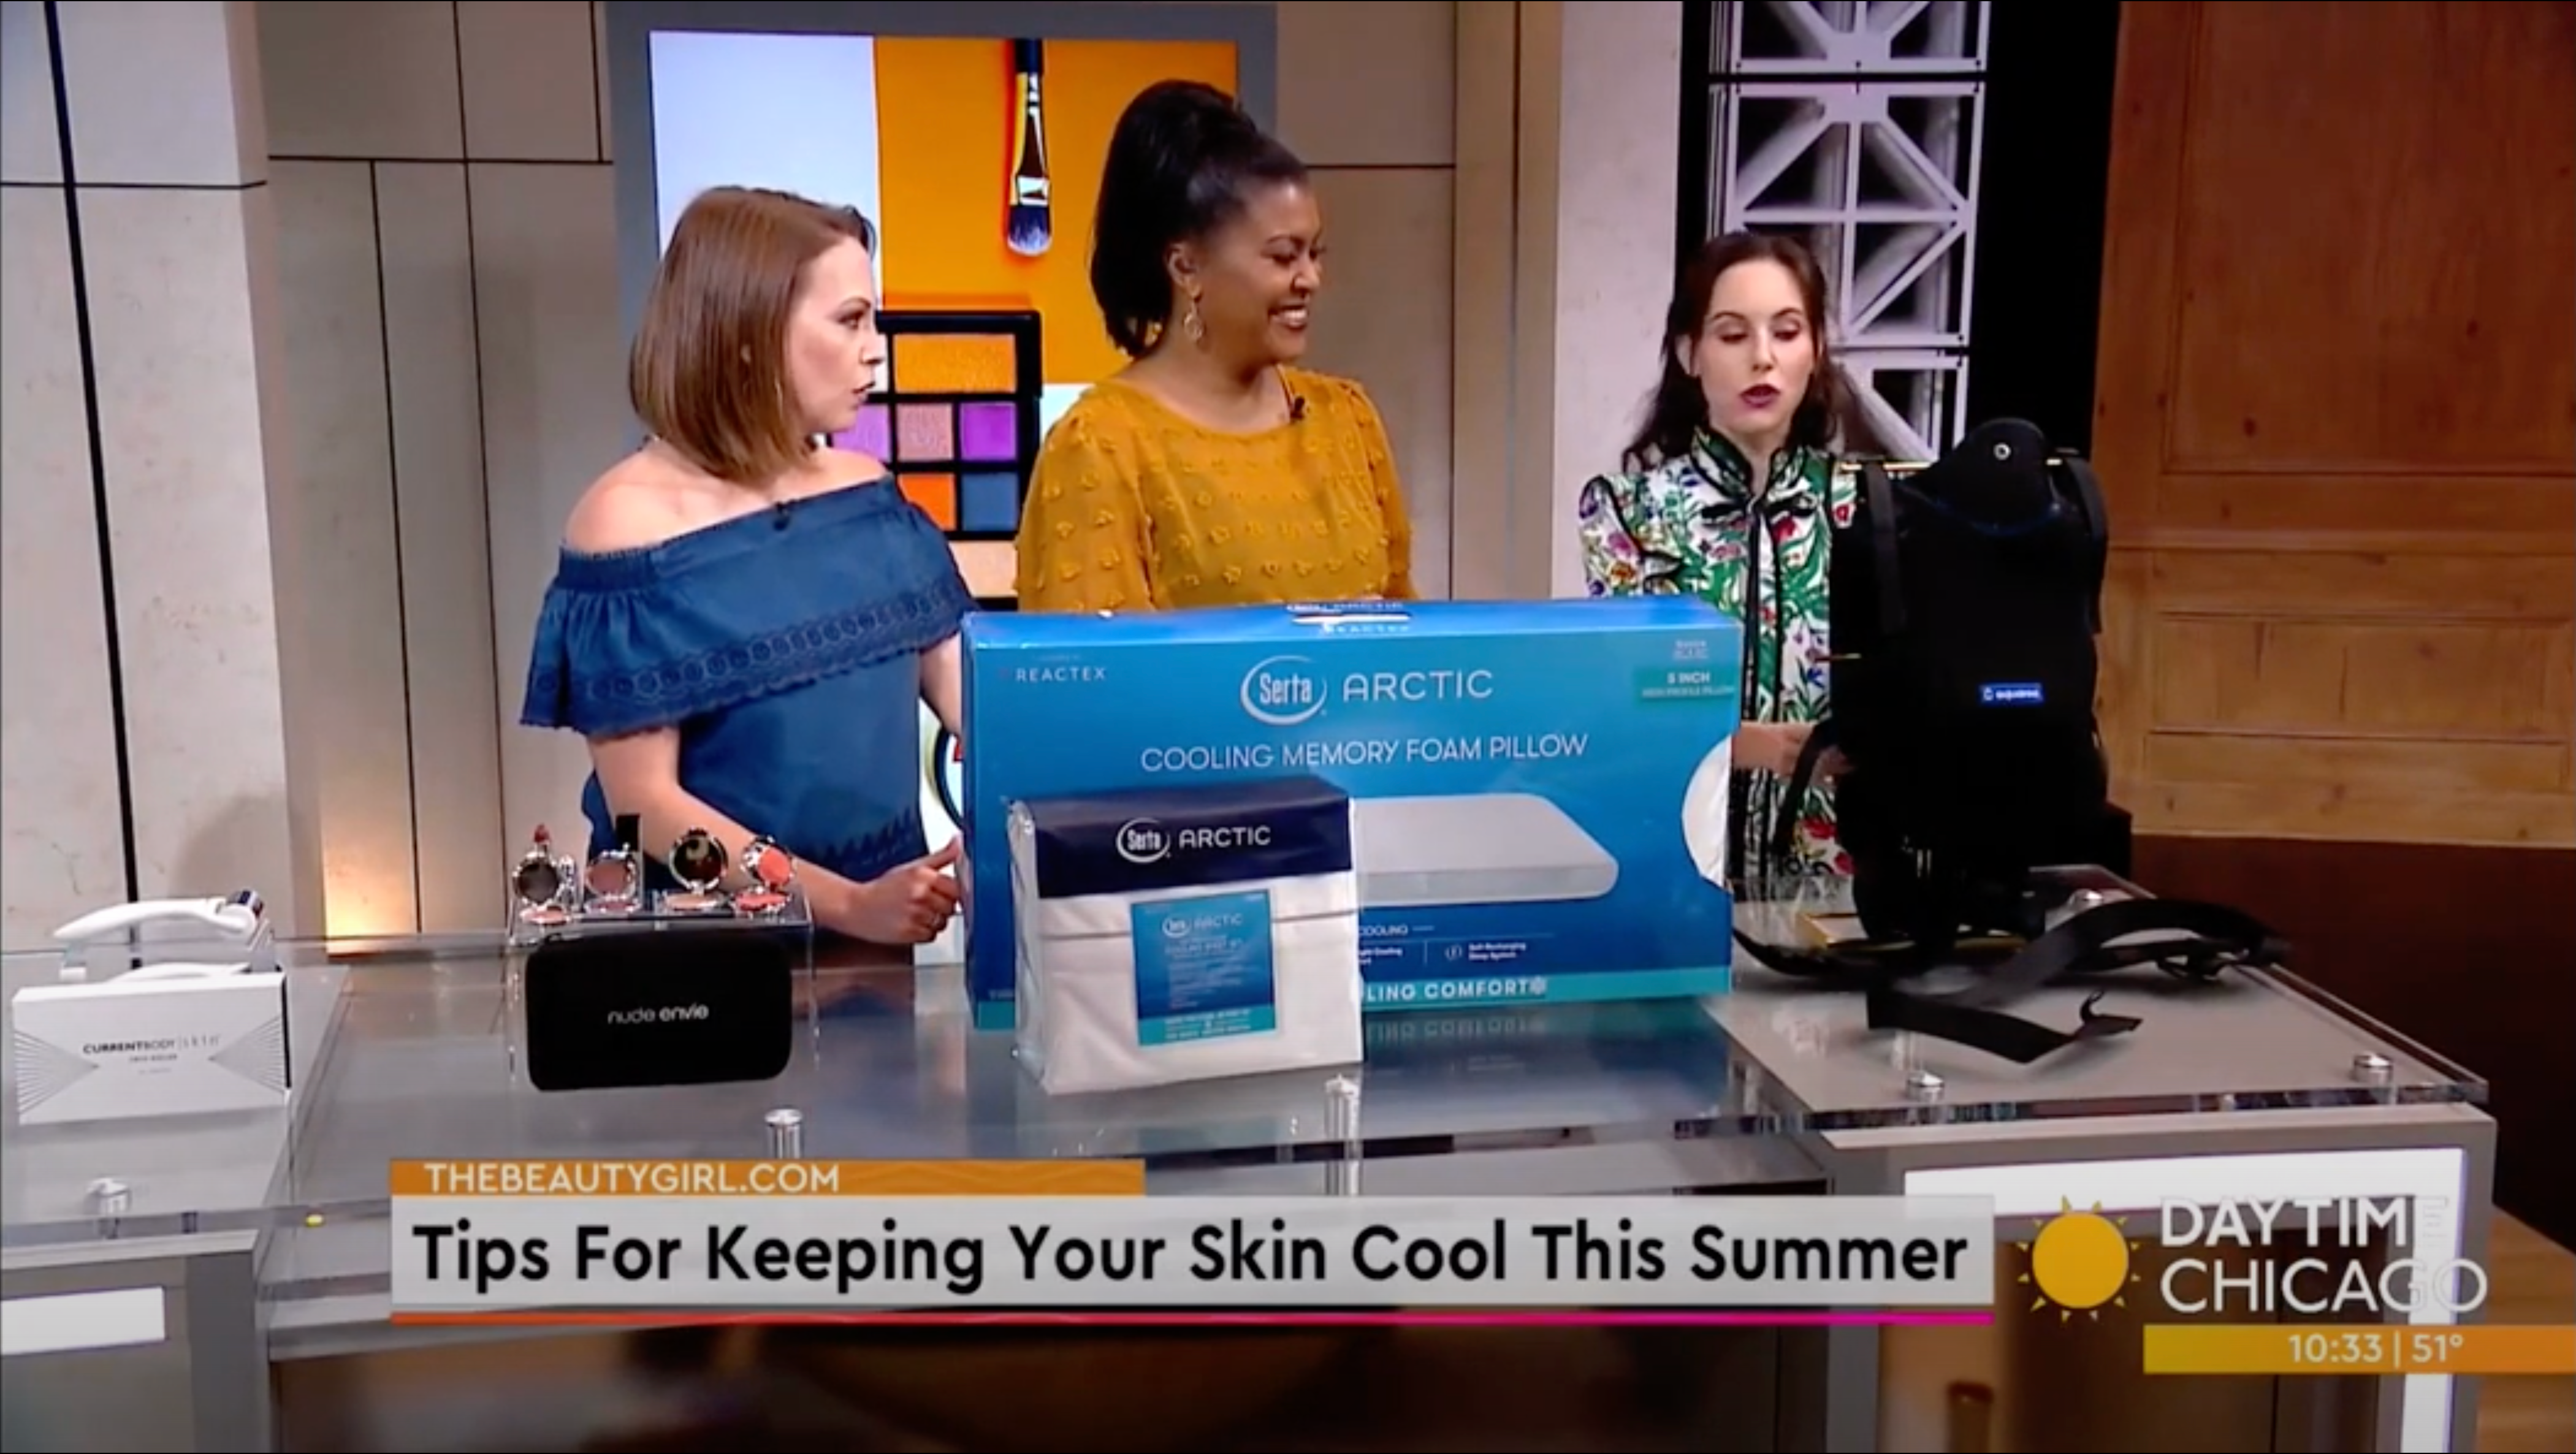 WGN9 Daytime Chicago - Tips For Keeping Your Skin Cool This Summer